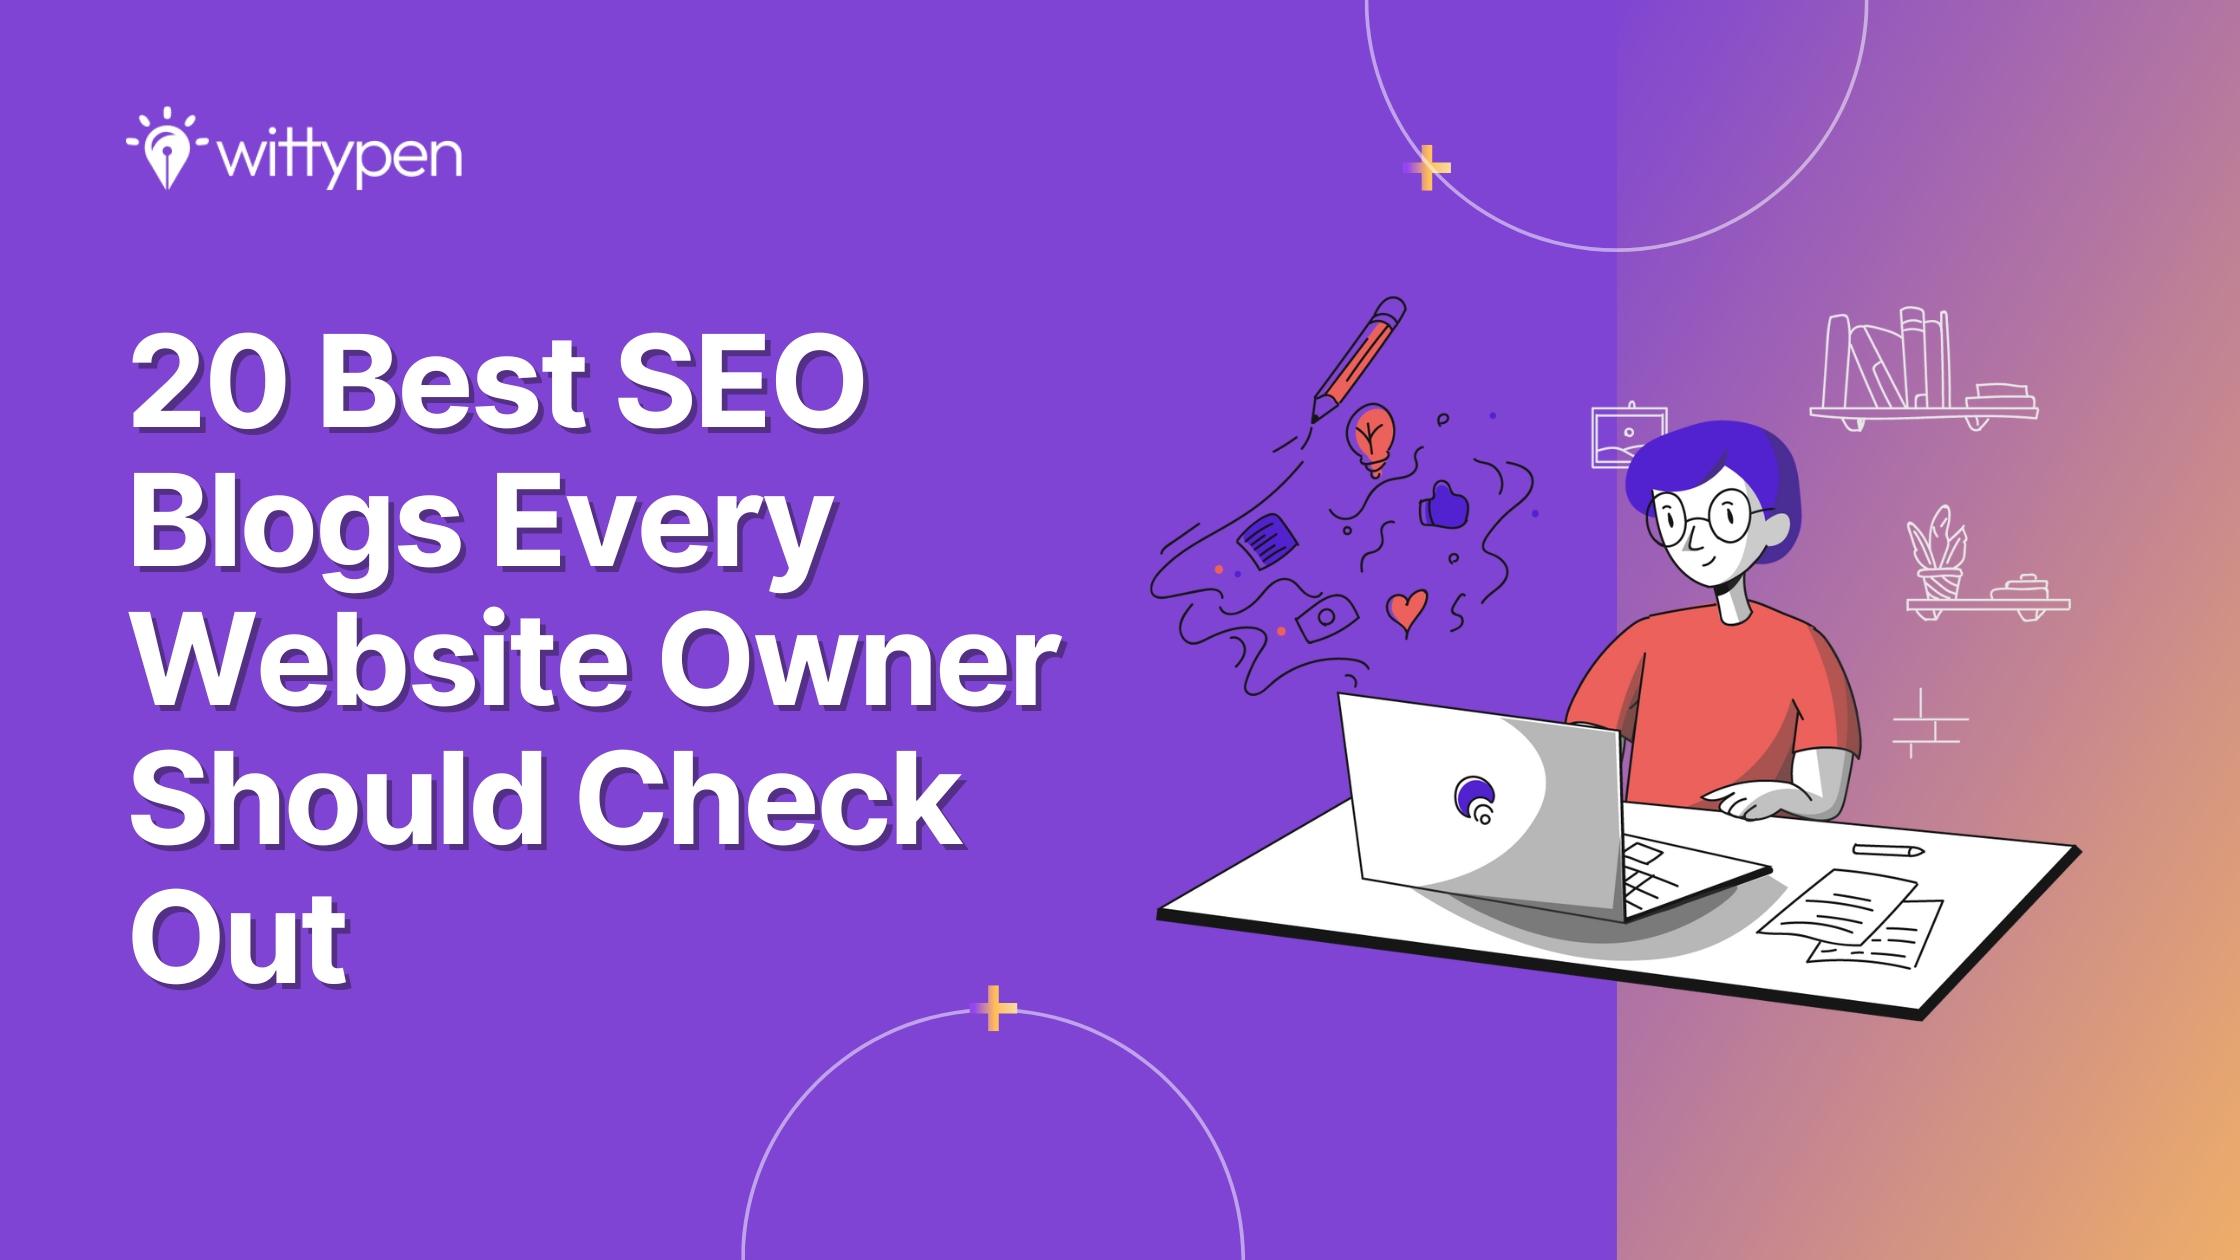 20 Best SEO Blogs Every Website Owner Should Check Out